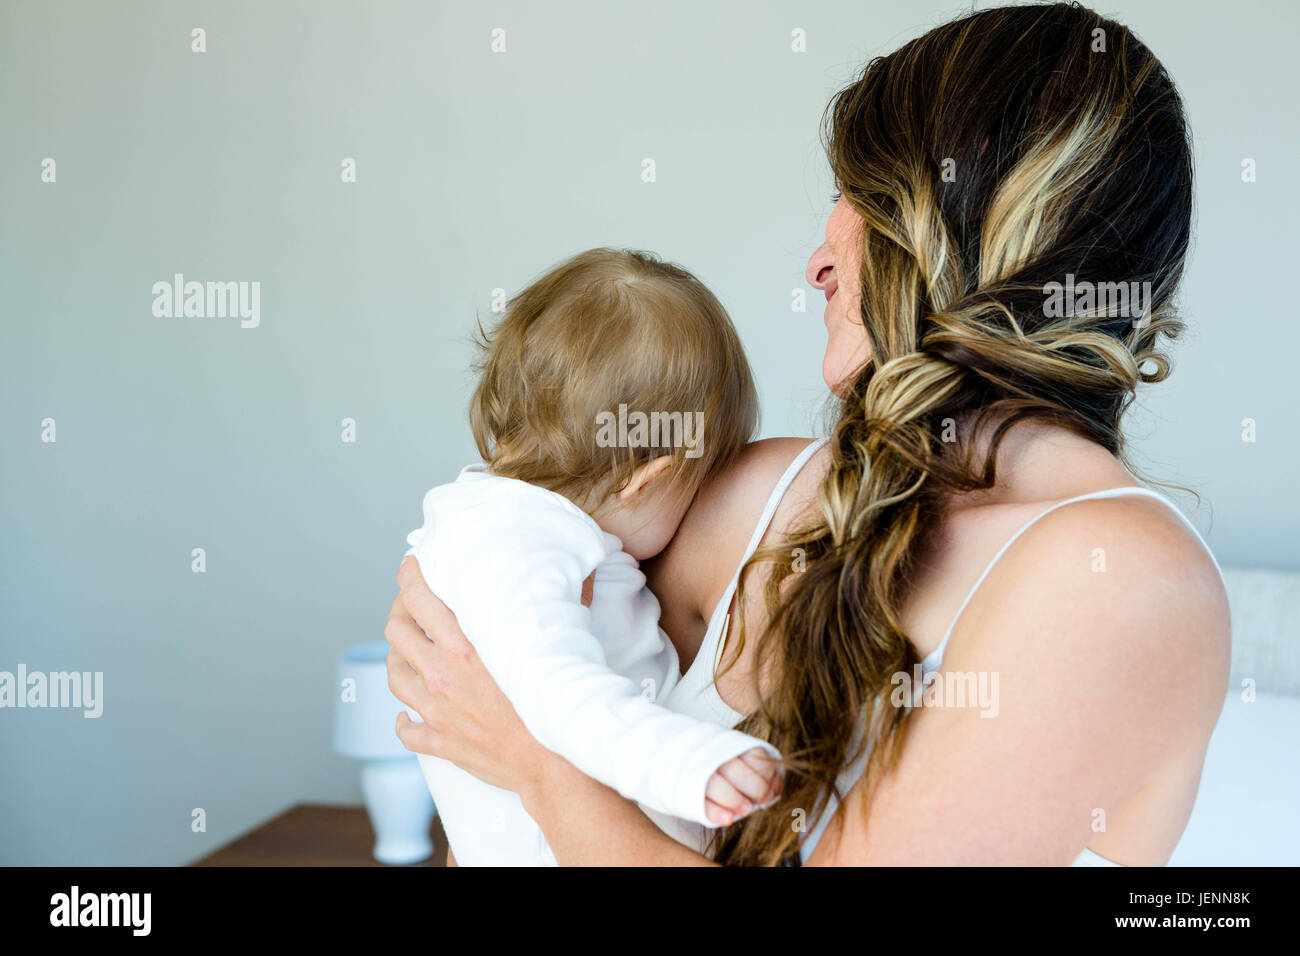 Smiling brunette woman holding a baby Banque D'Images